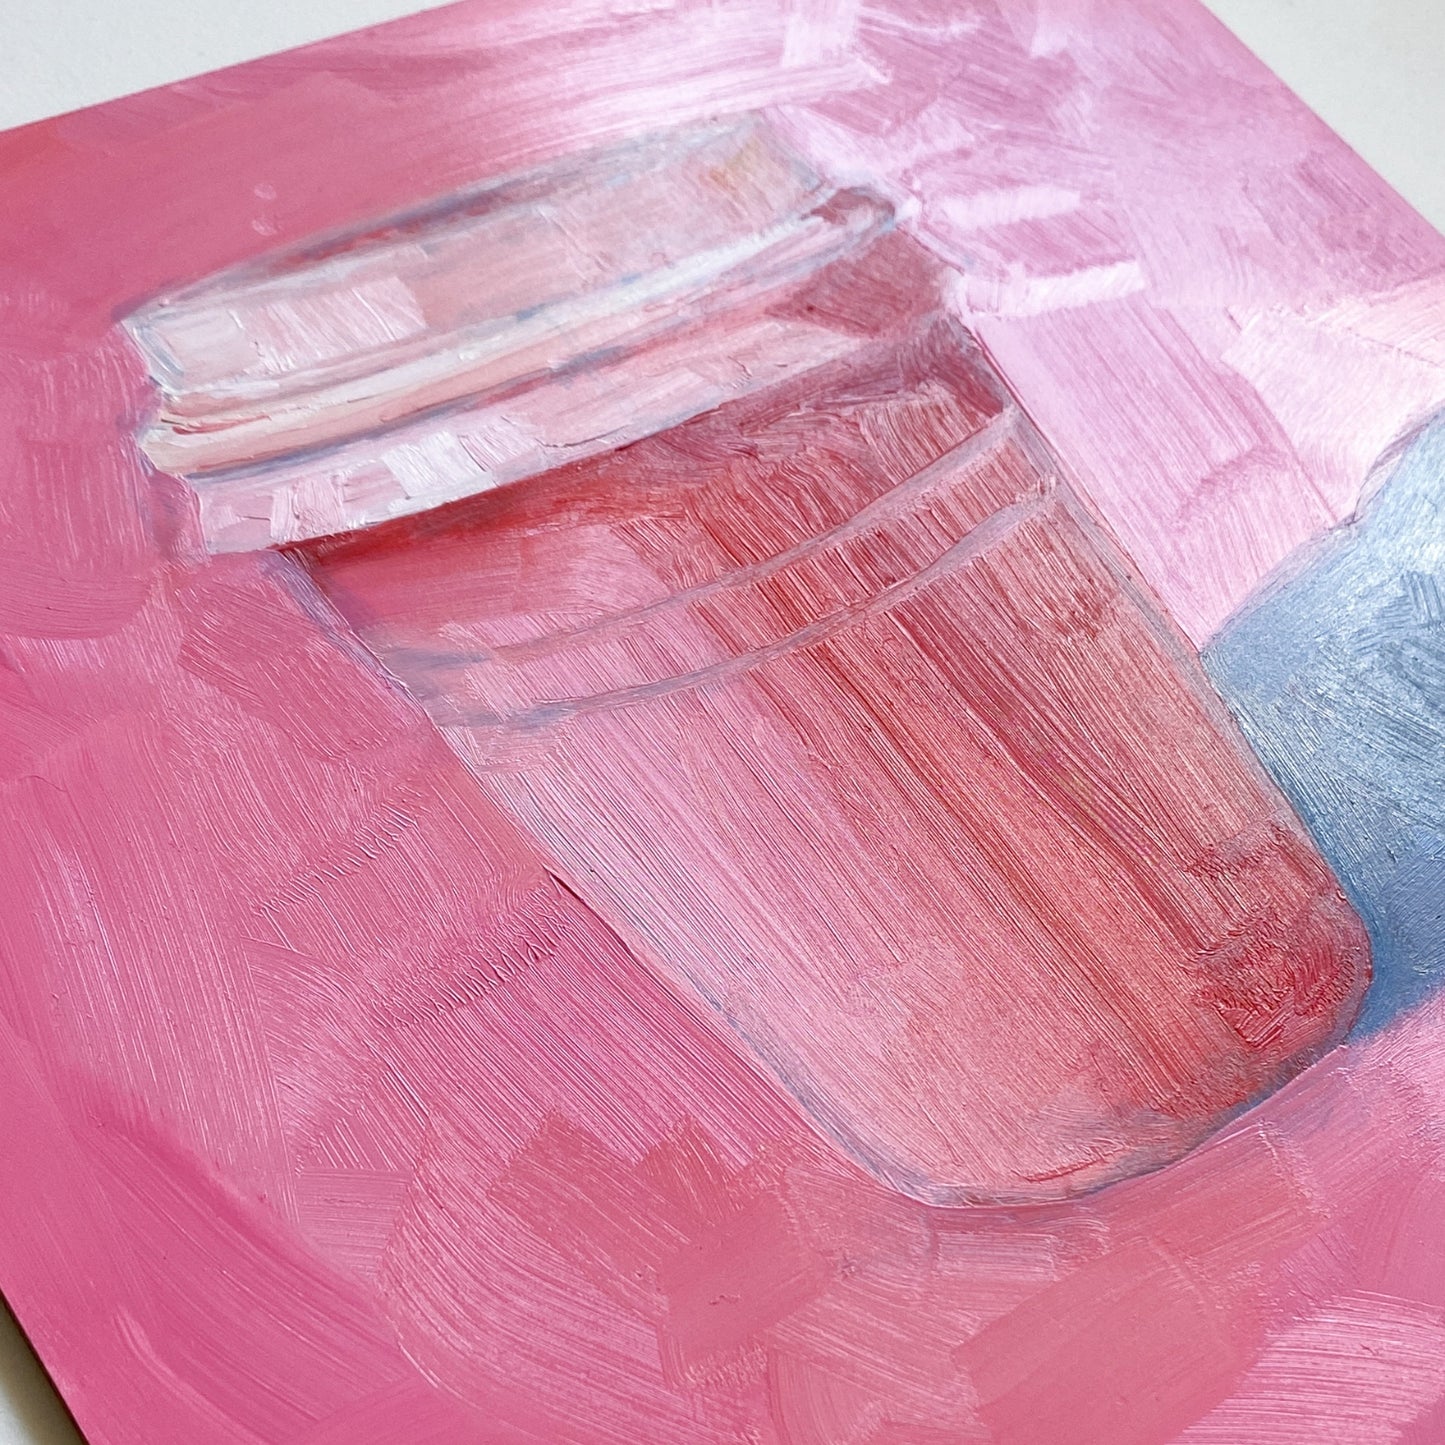 closeup of an original oil painting of a pink and red take away coffee cup on a textured bright pink background with strong greyish blue shadows.